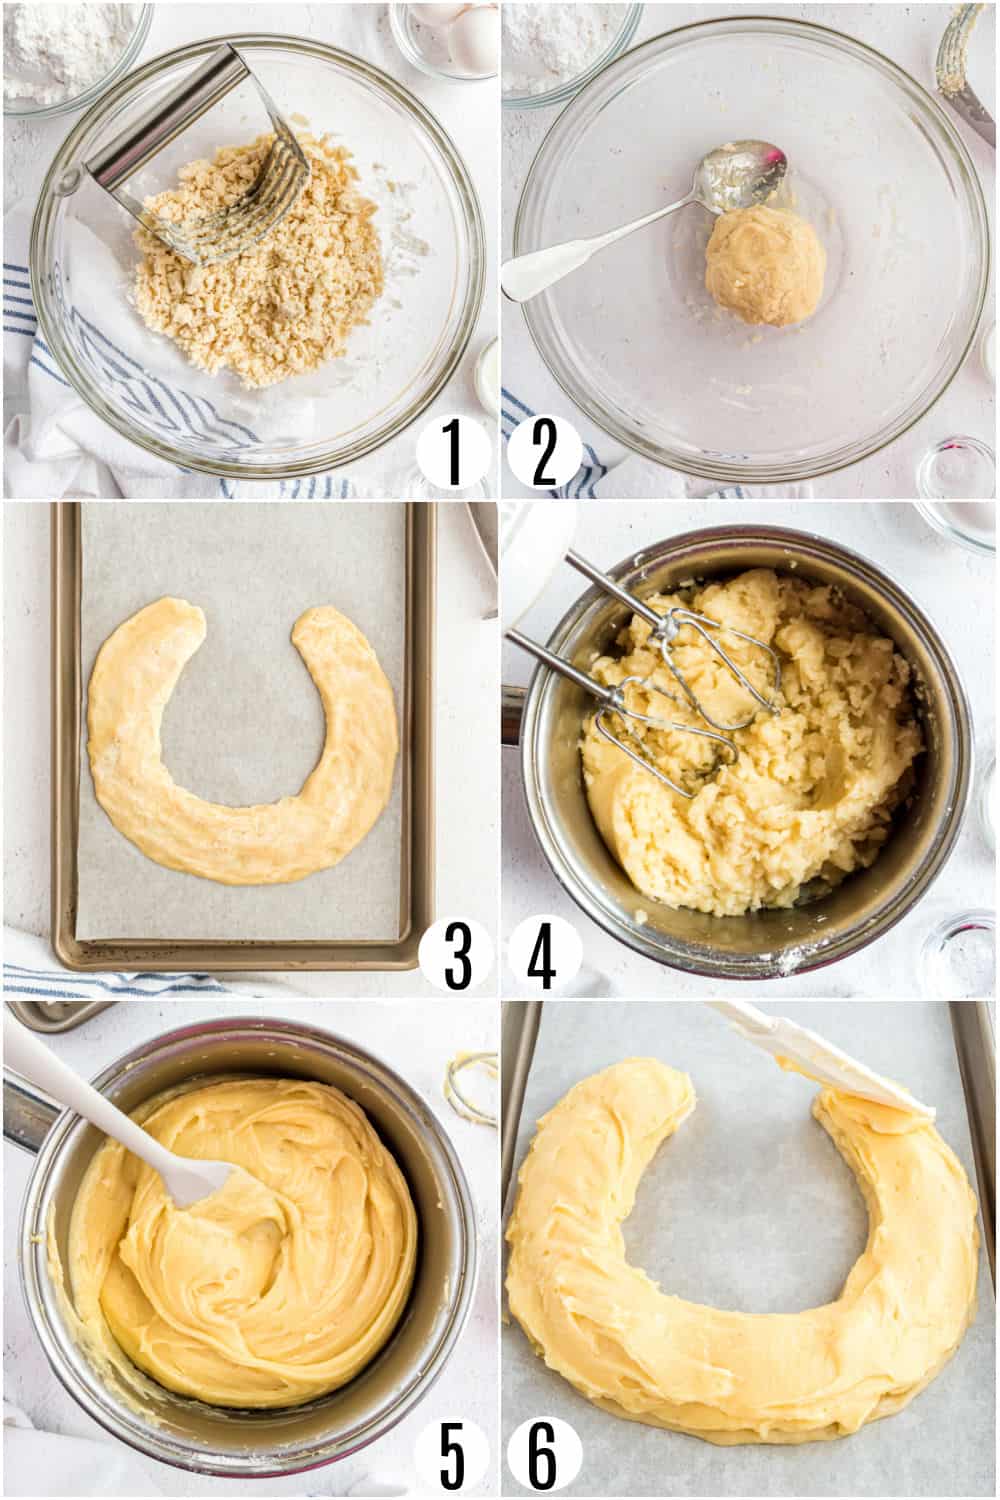 Step by step photos showing how to make a kringle.